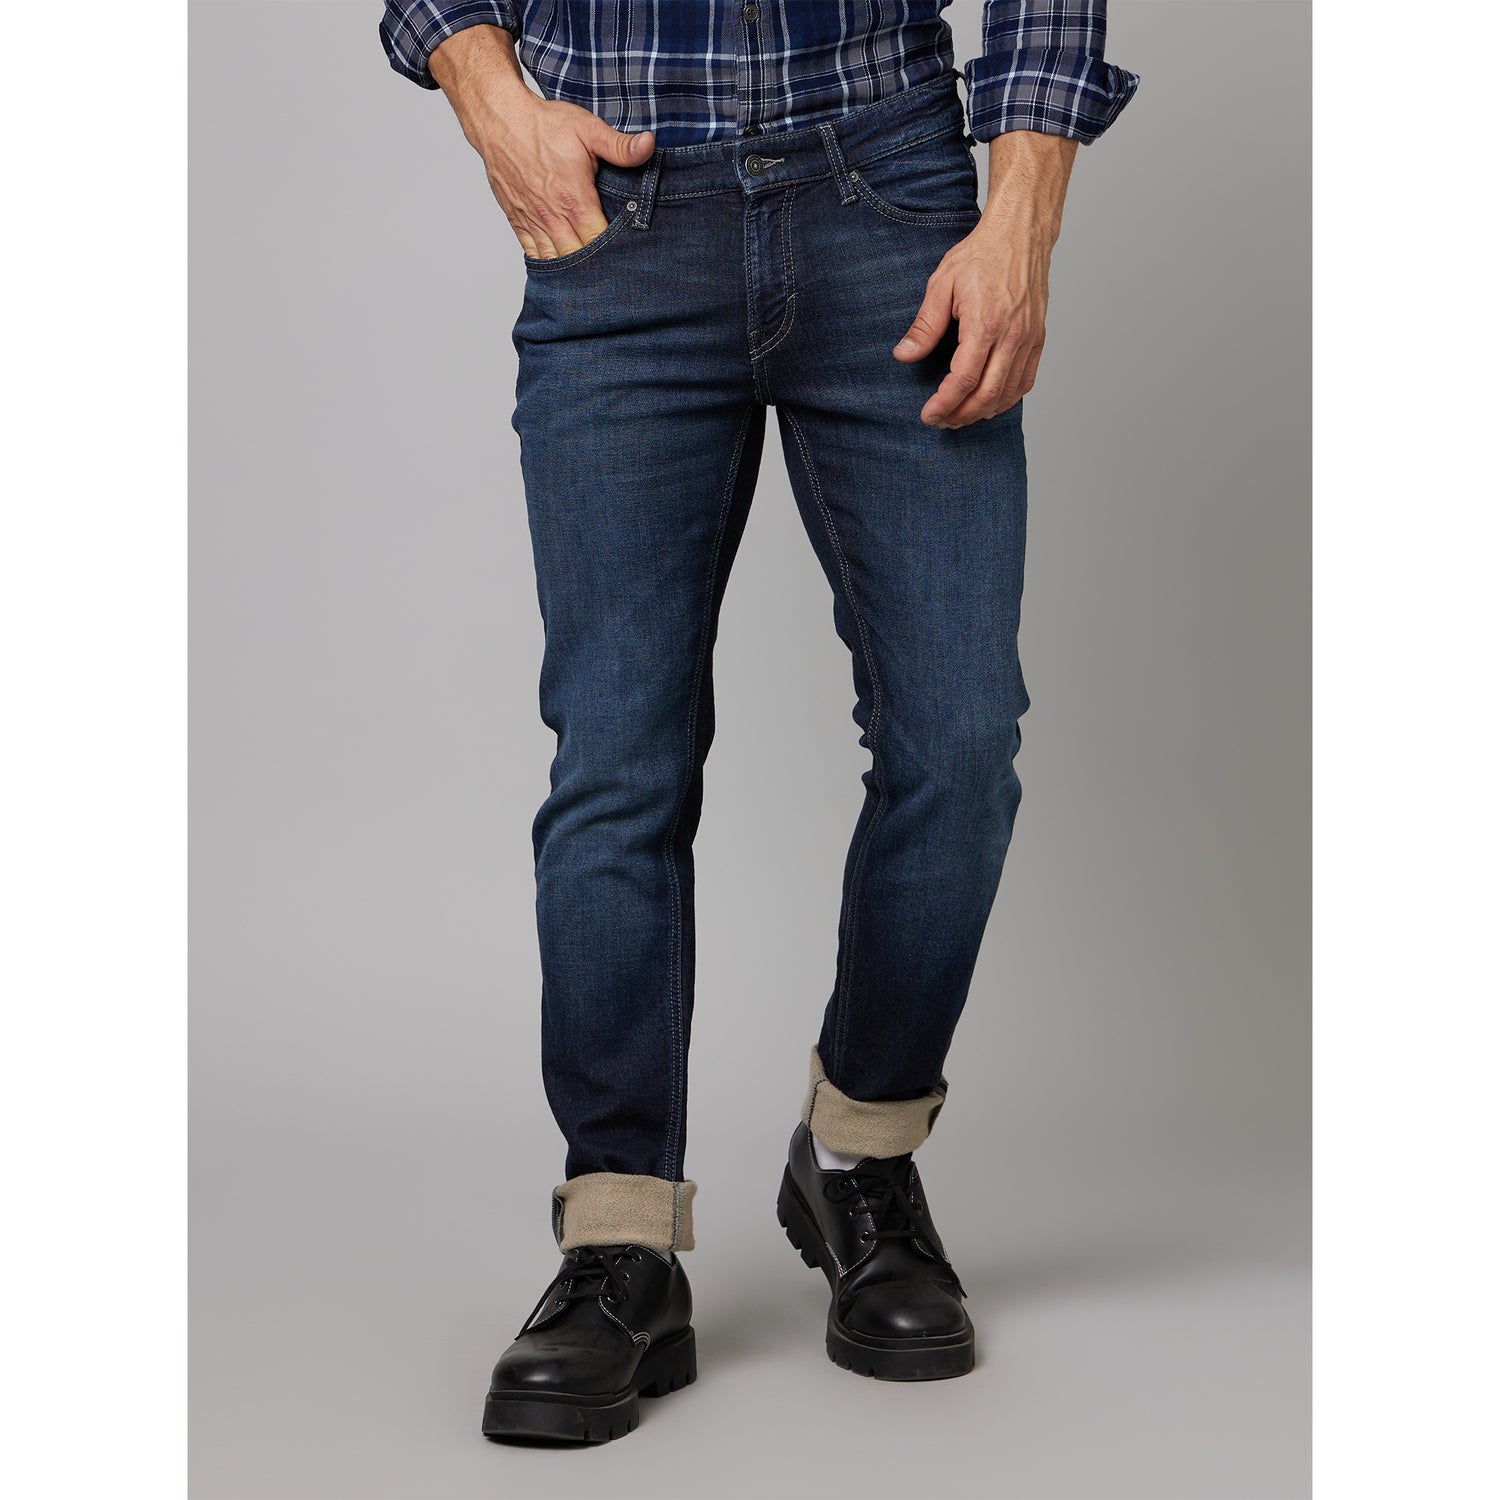 Navy Blue Mid-Rise Jean Relaxed Fit Clean Look Light Fade Jeans (DOGENKNIT)